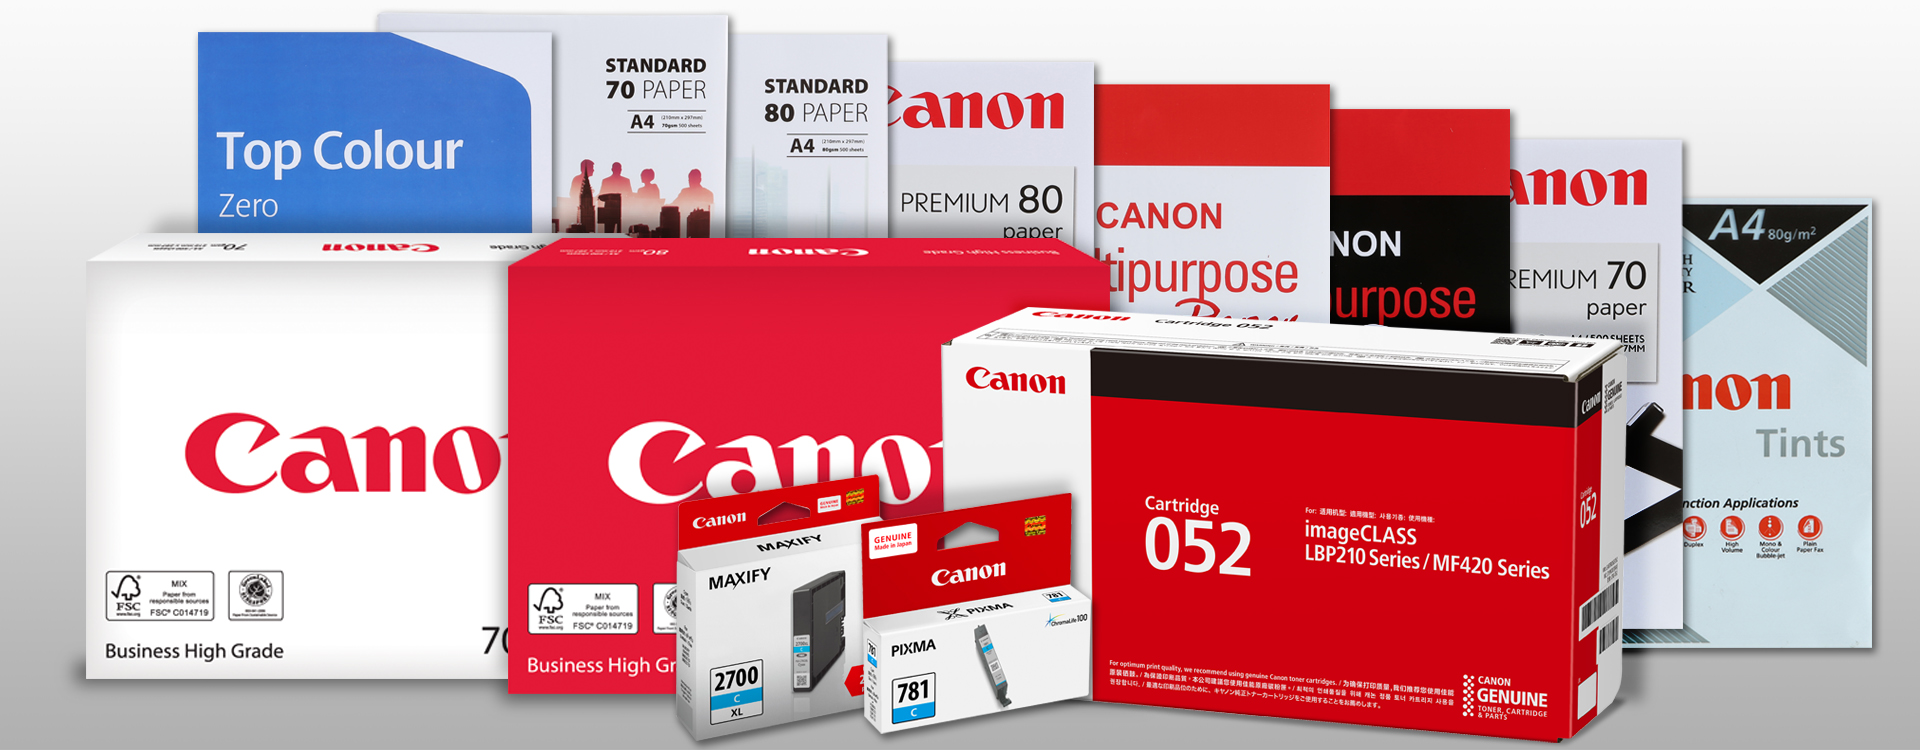 Product List - Supplies - Canon Malaysia